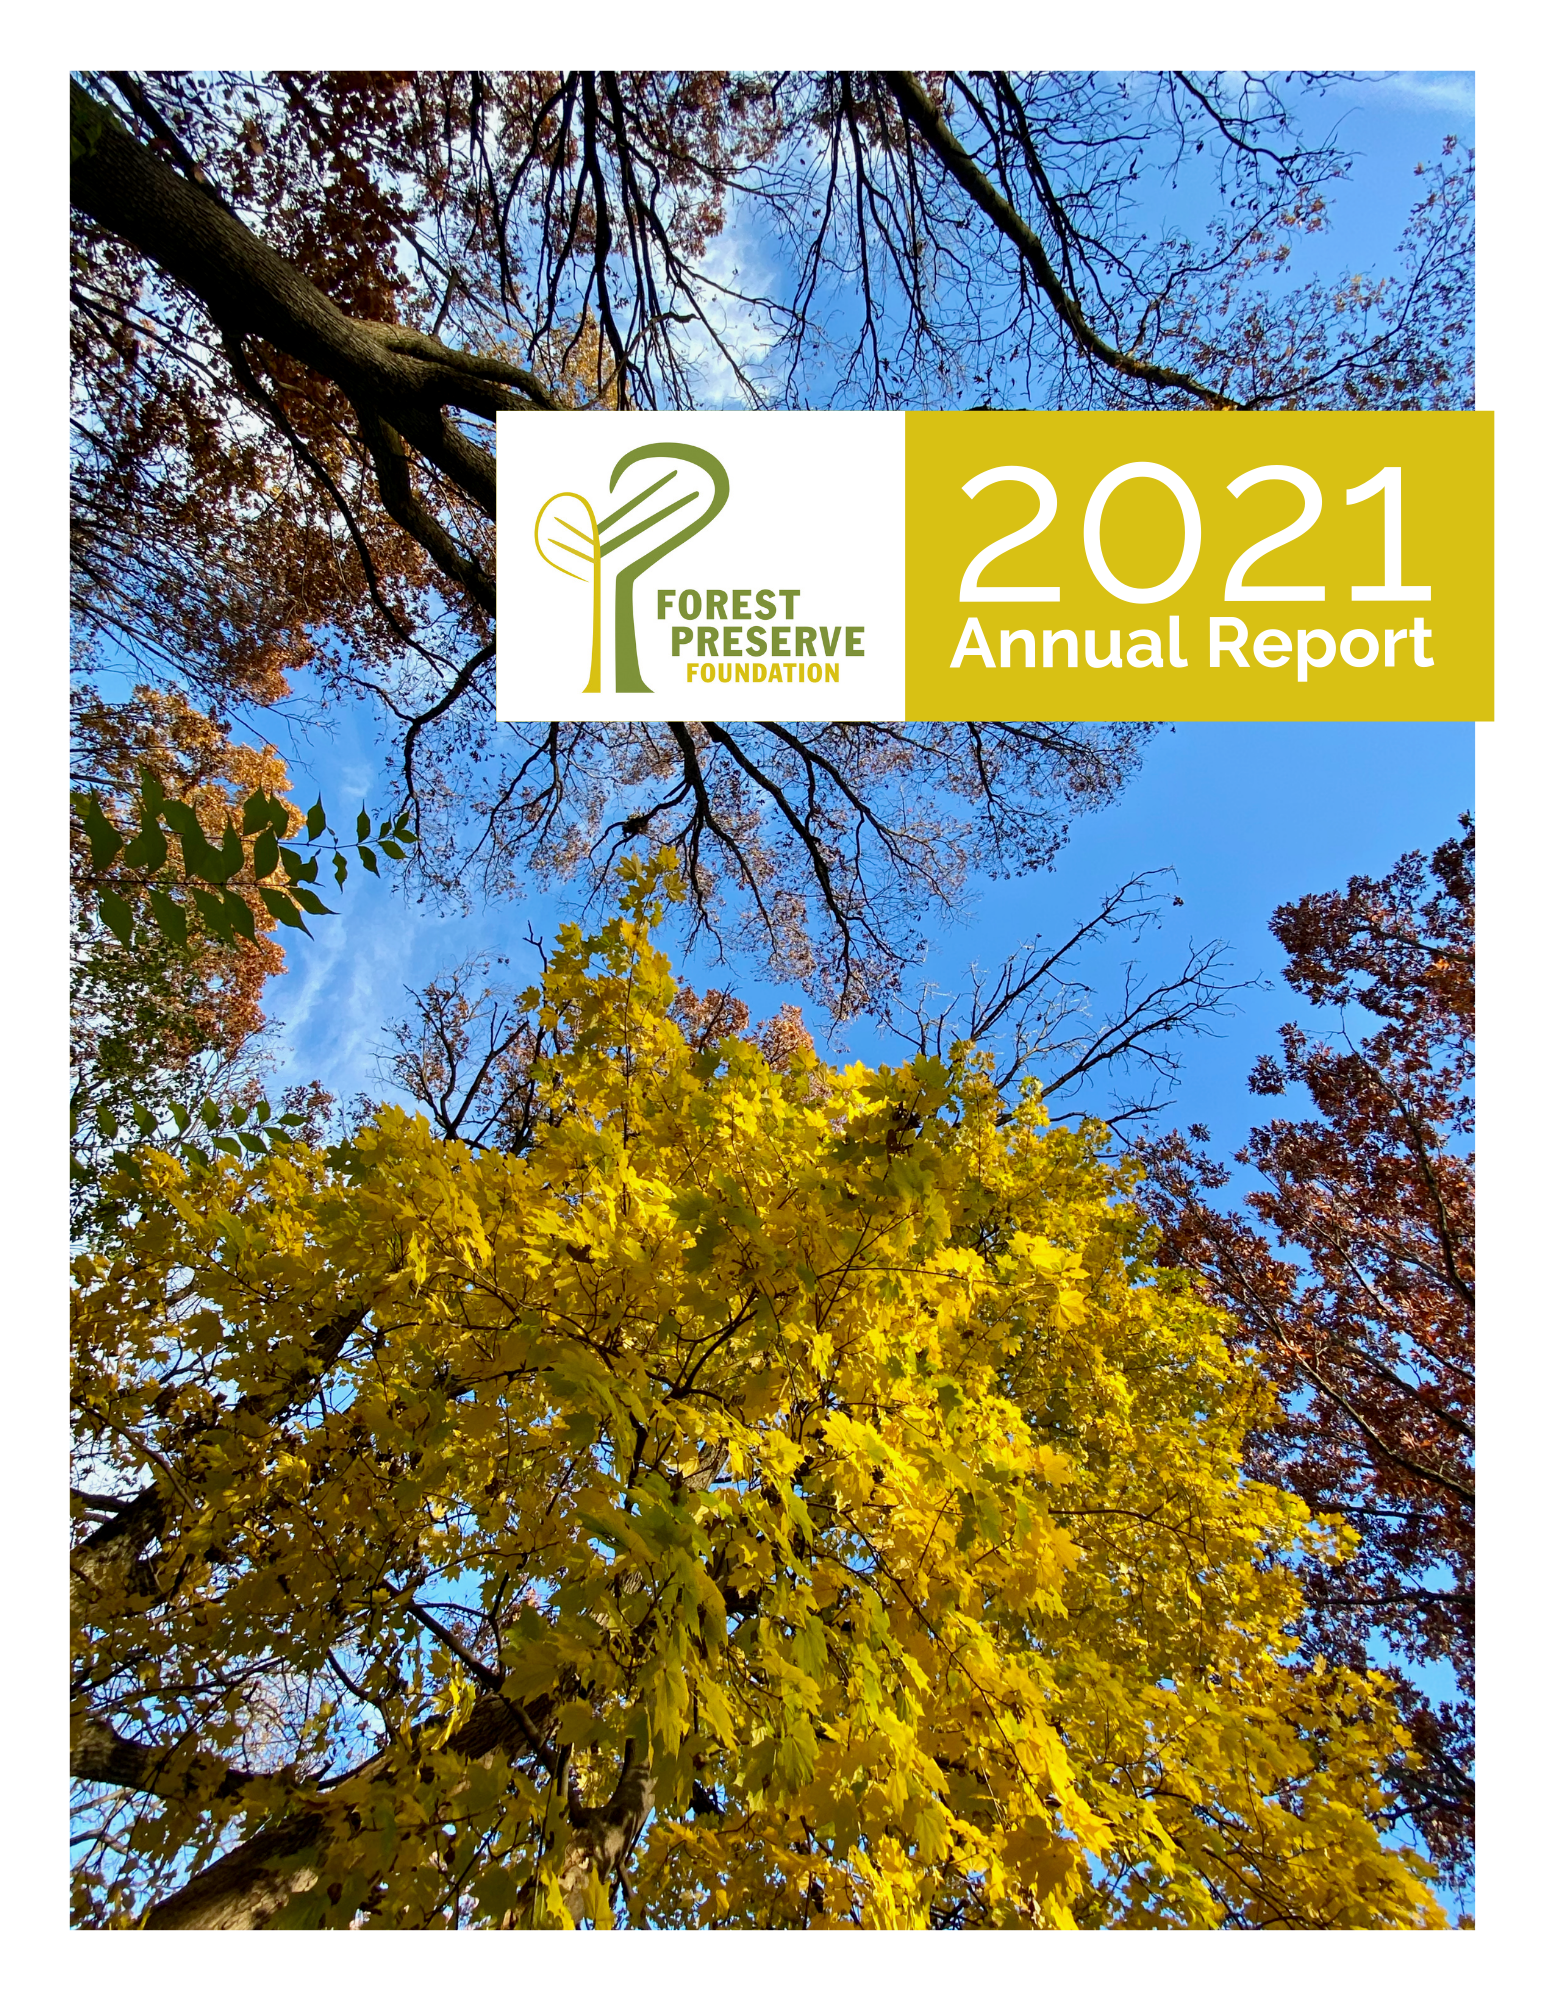 2021_Forest_Preserve_Foundation_Annual-Report_cover